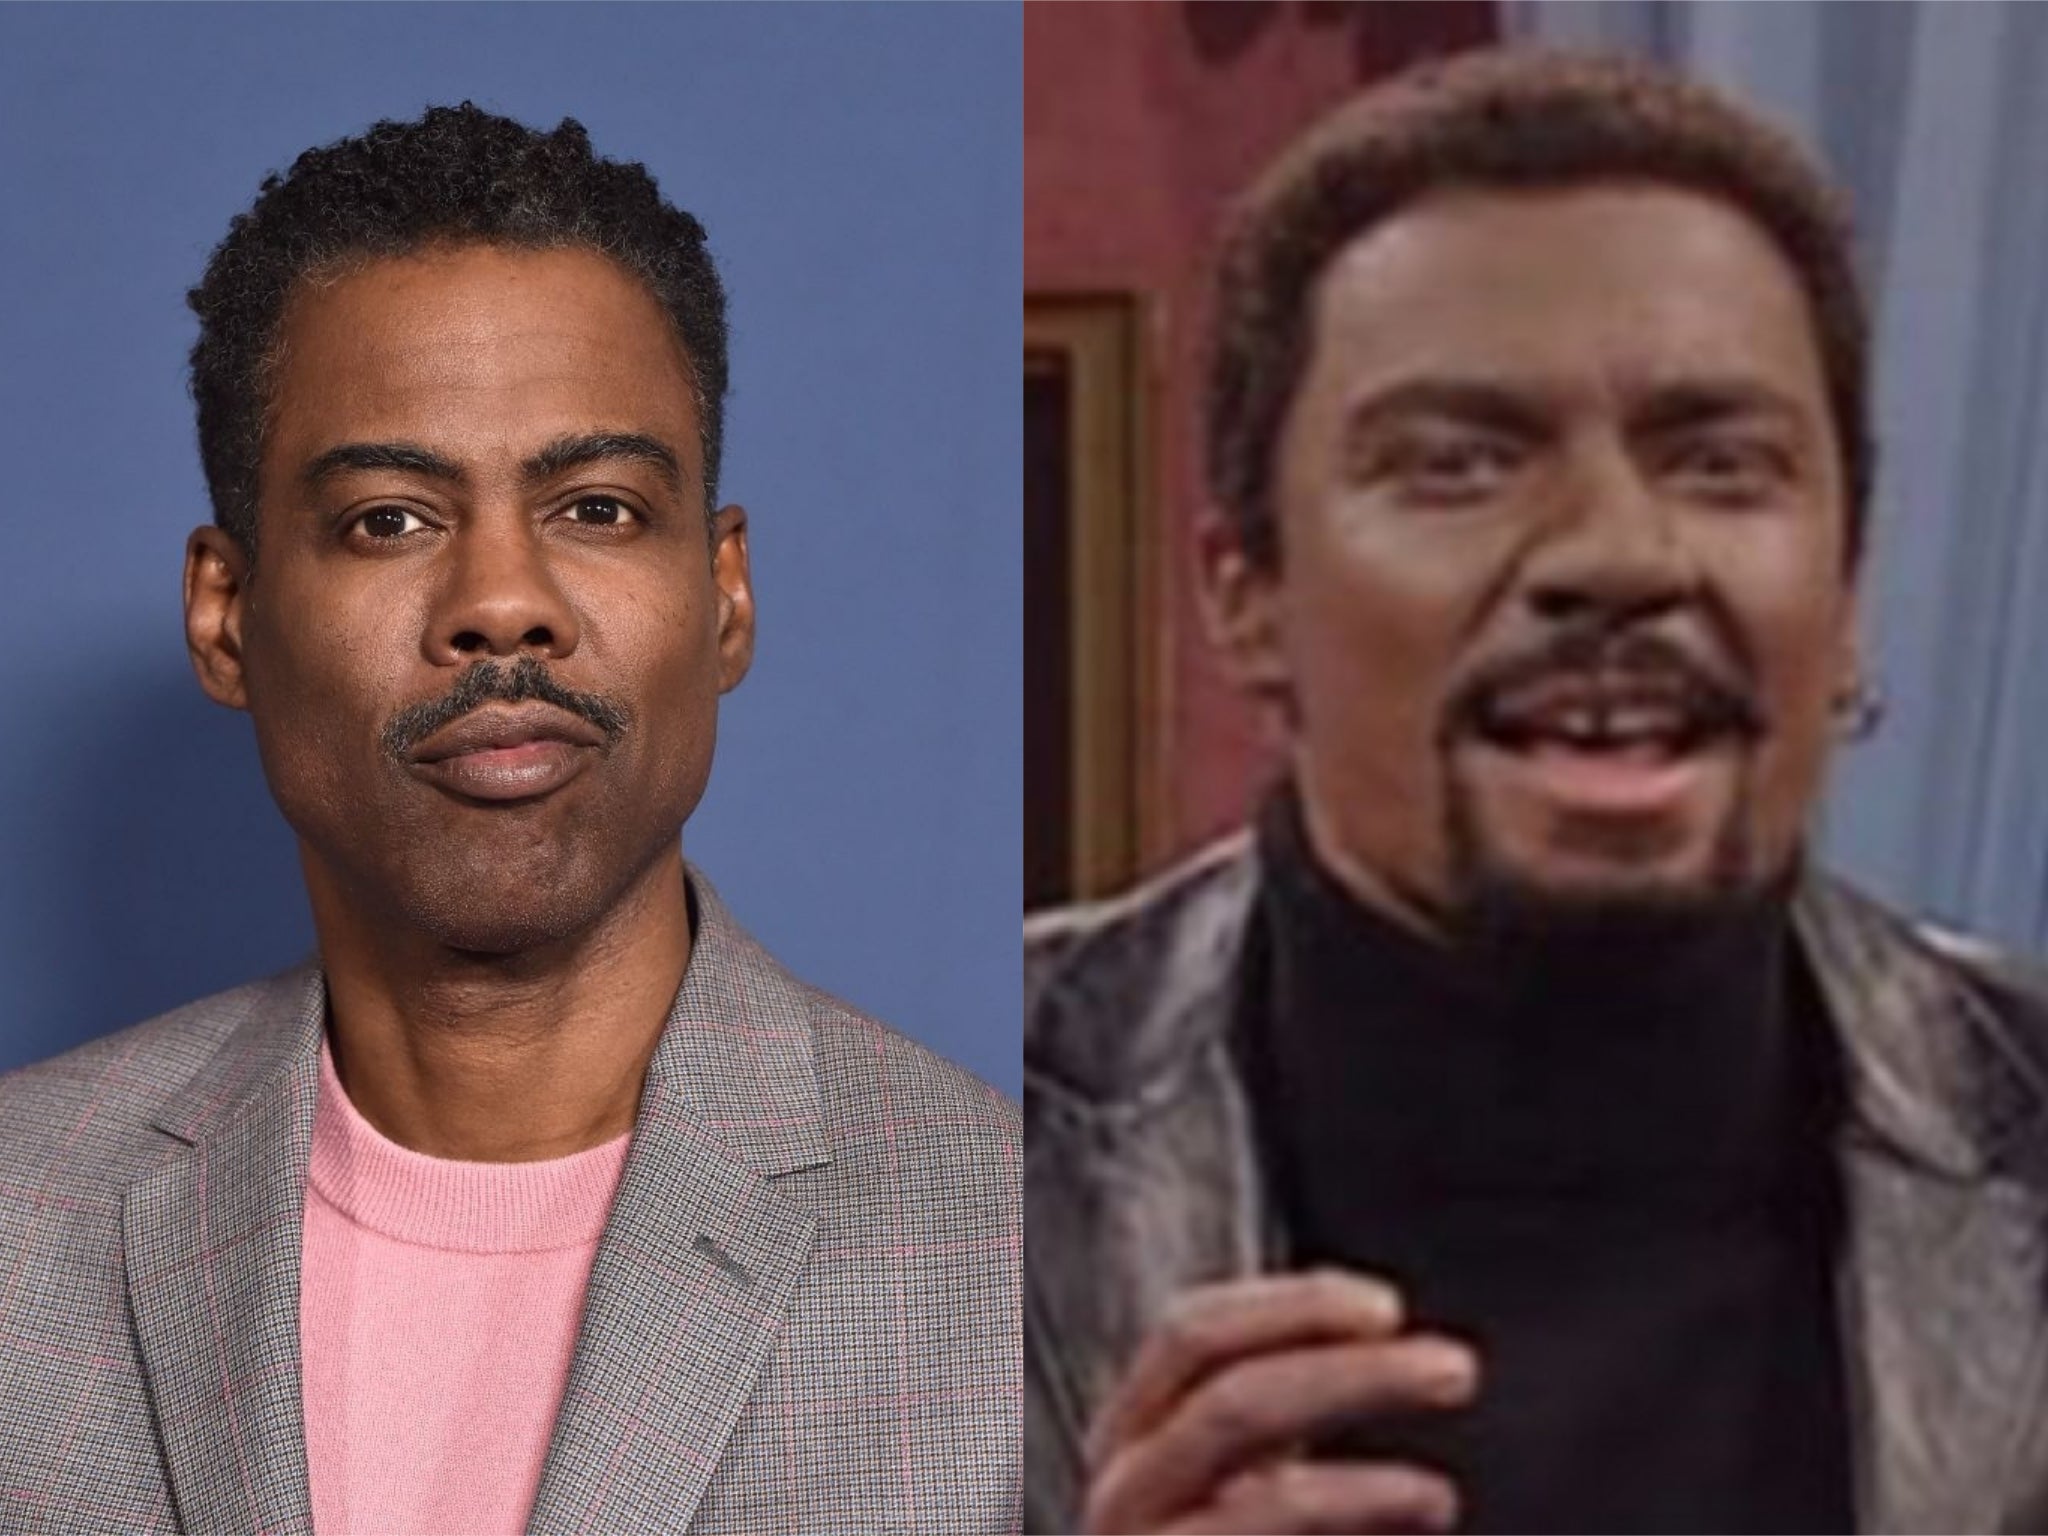 Chris Rock, and Jimmy Fallon's blackface impression of Rock in 2000